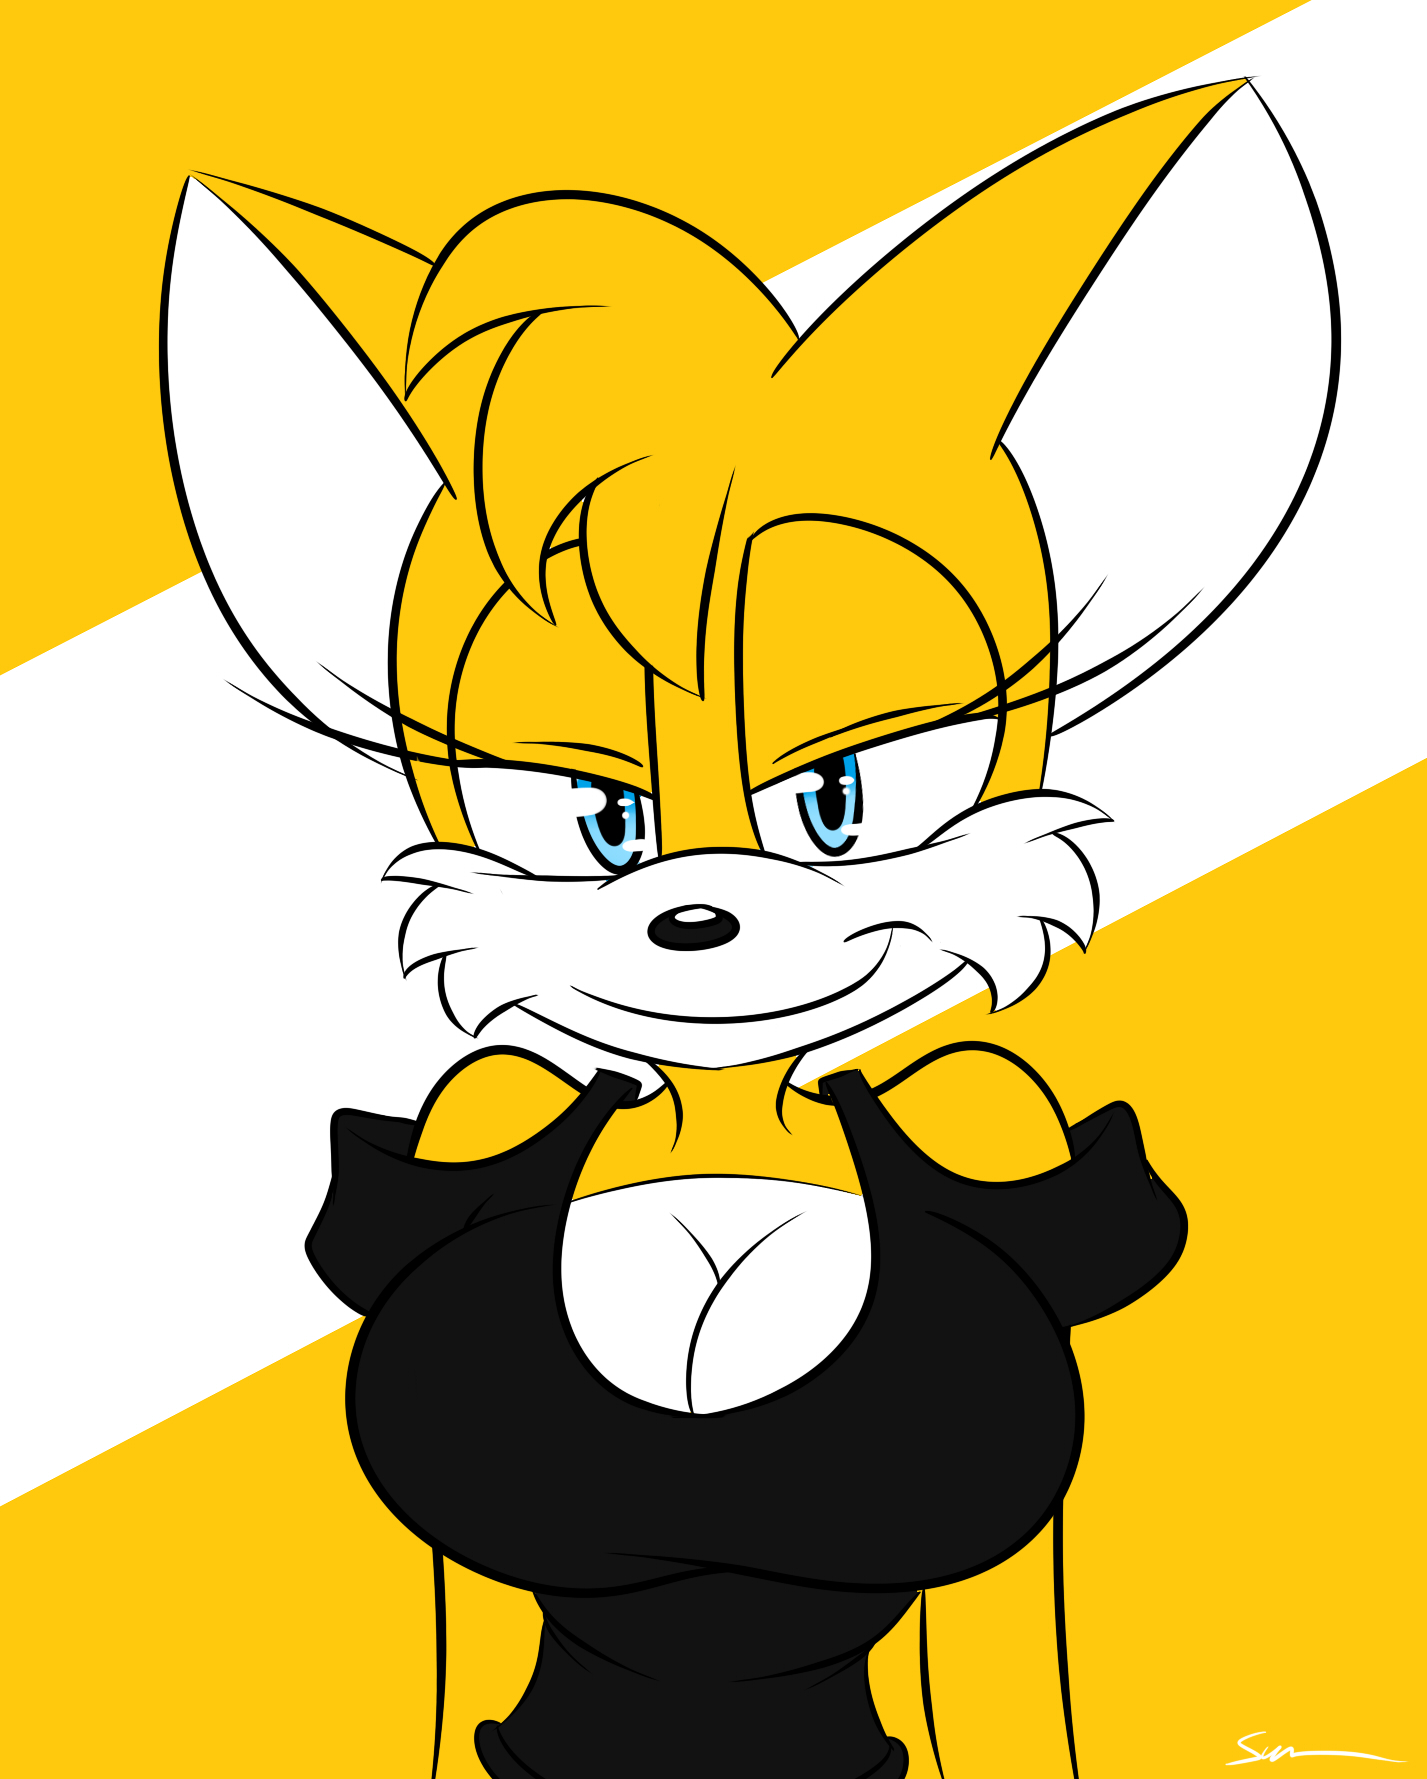 This is for the Tails fans that like to call her Tailsko, or Miley.